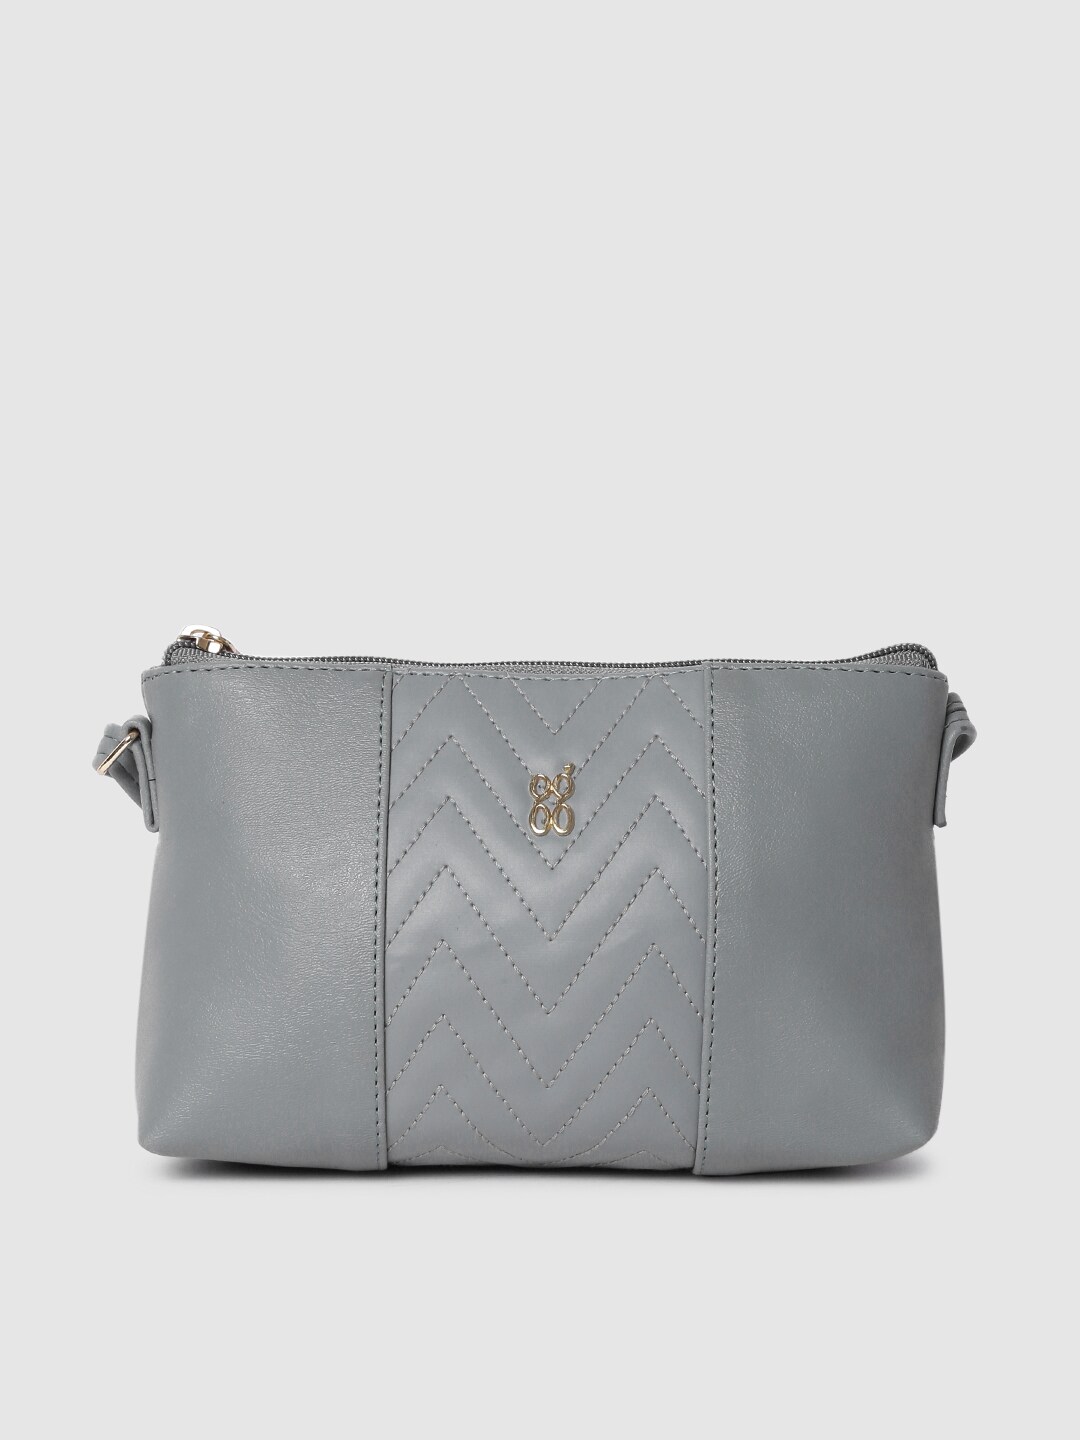 Baggit Grey Structured Sling Bag Price in India